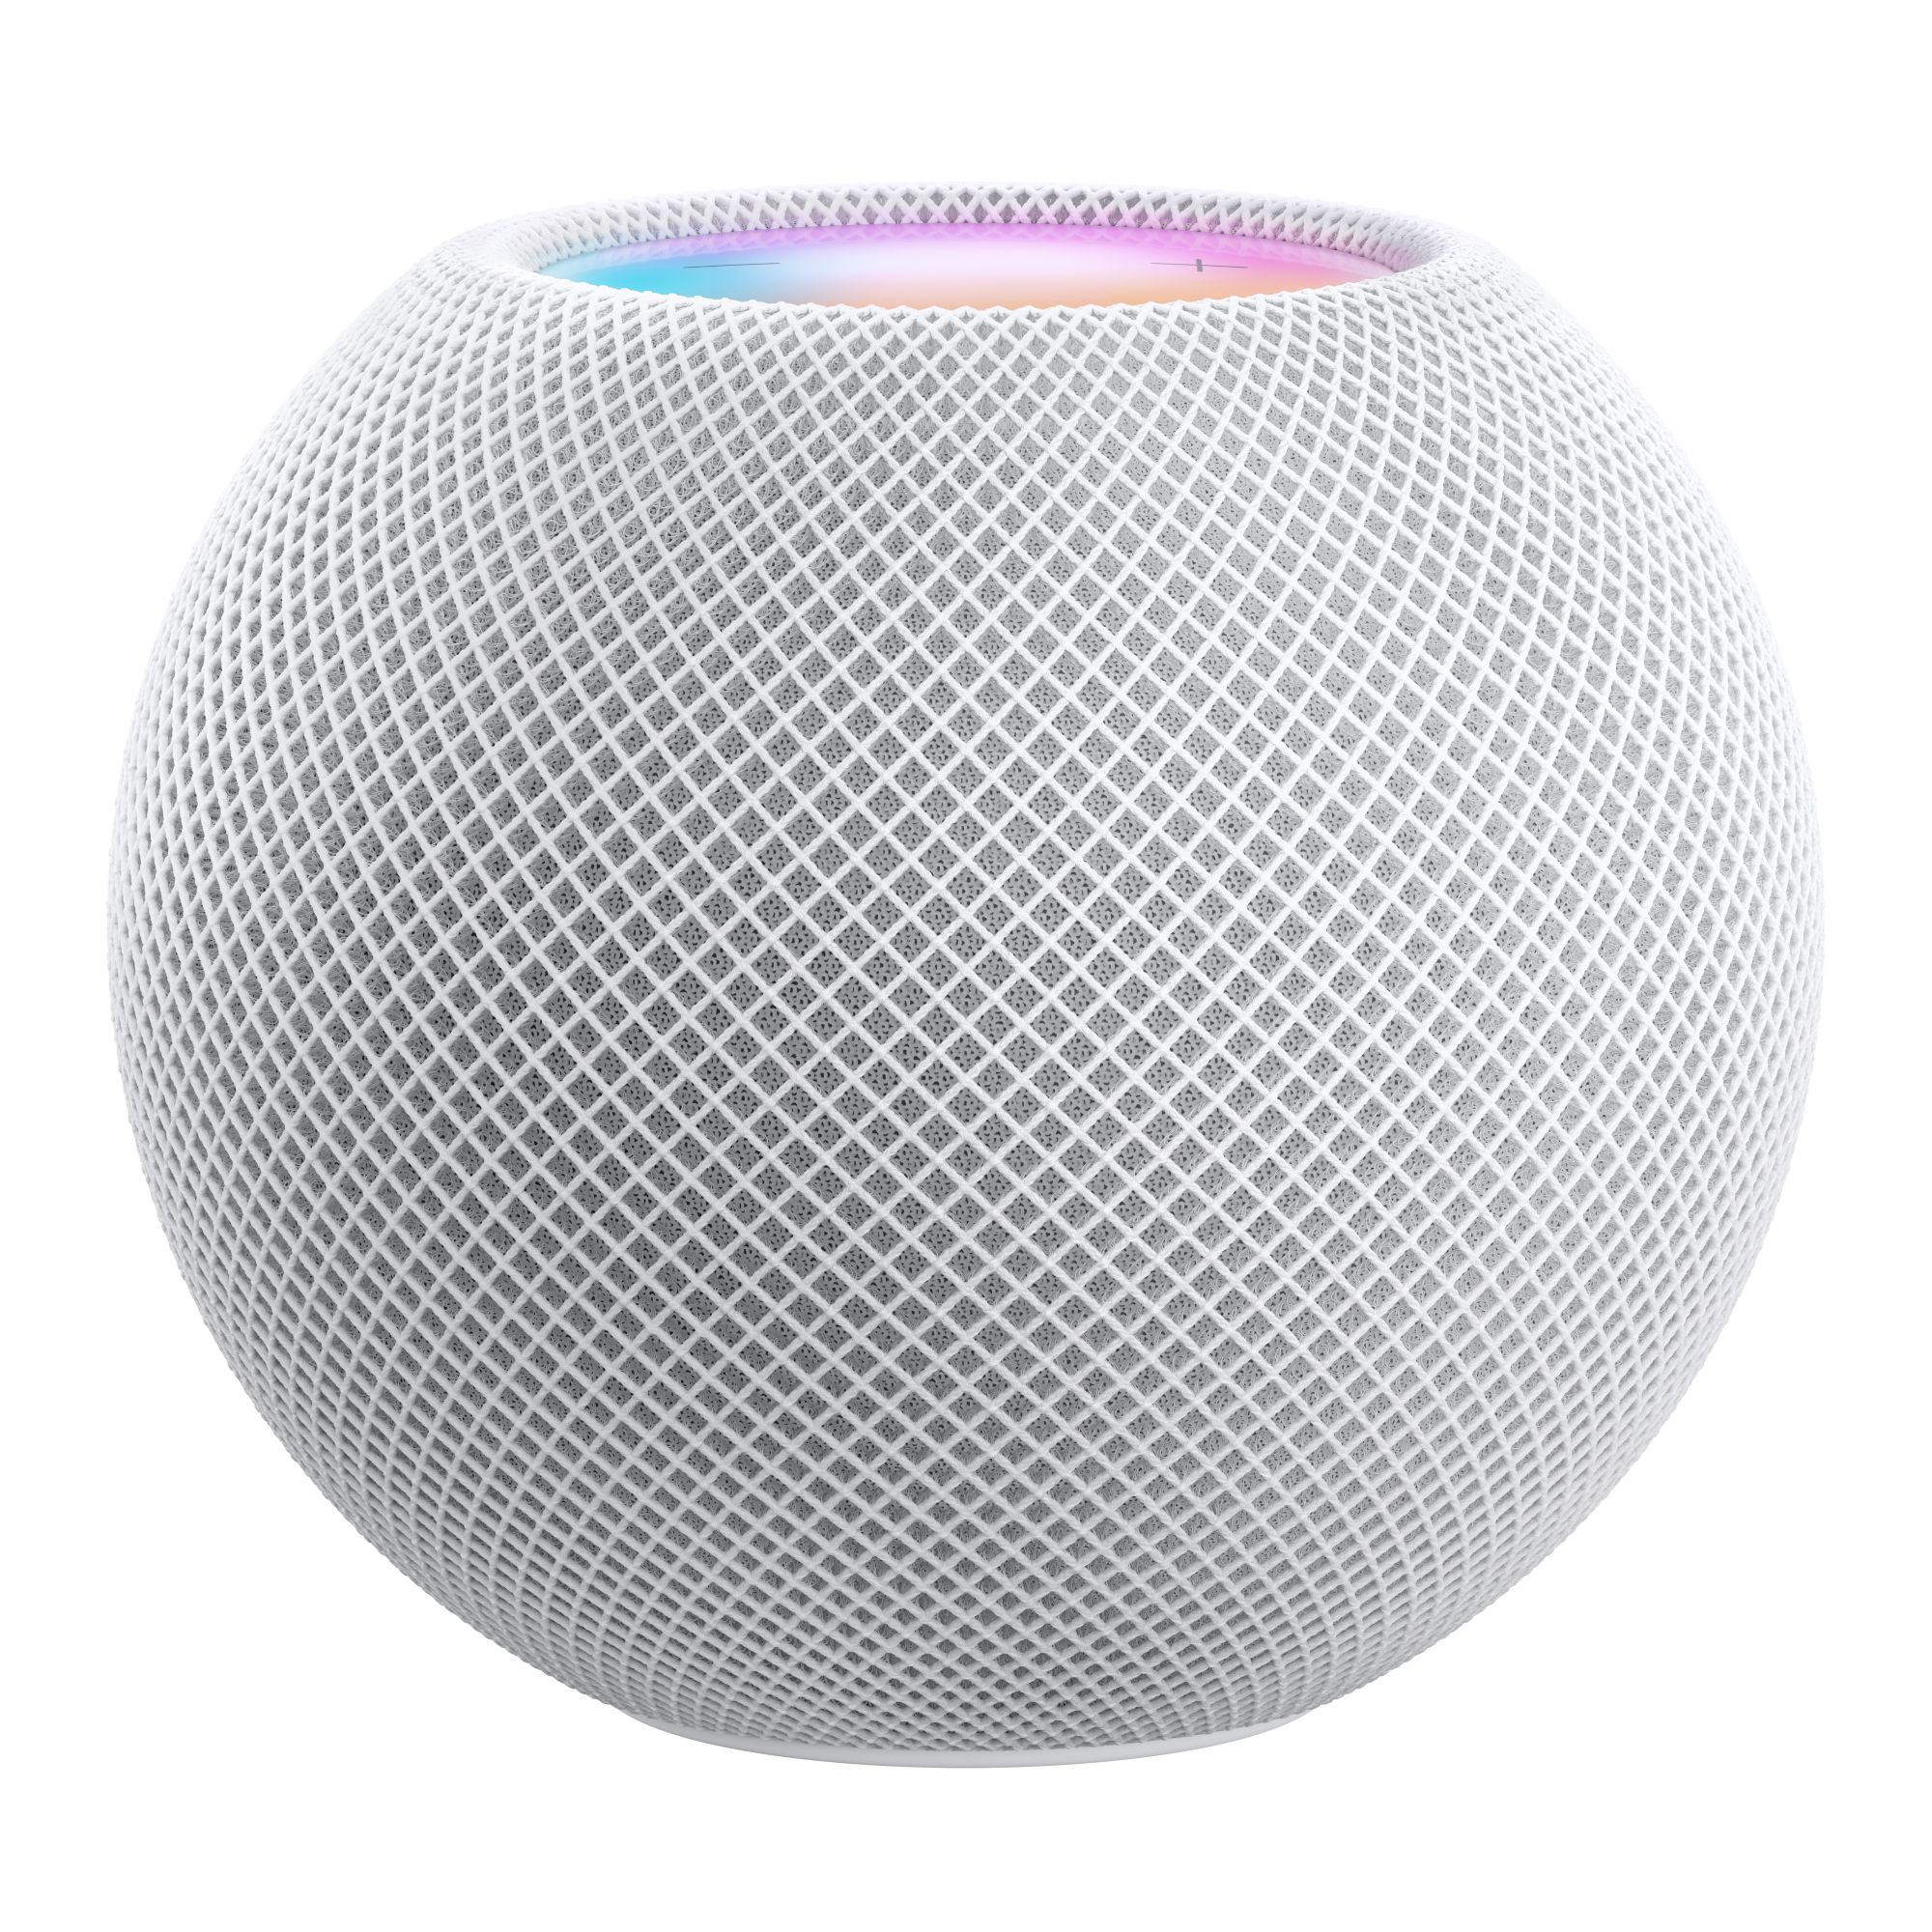 Apple HomePod mini and Charger - White